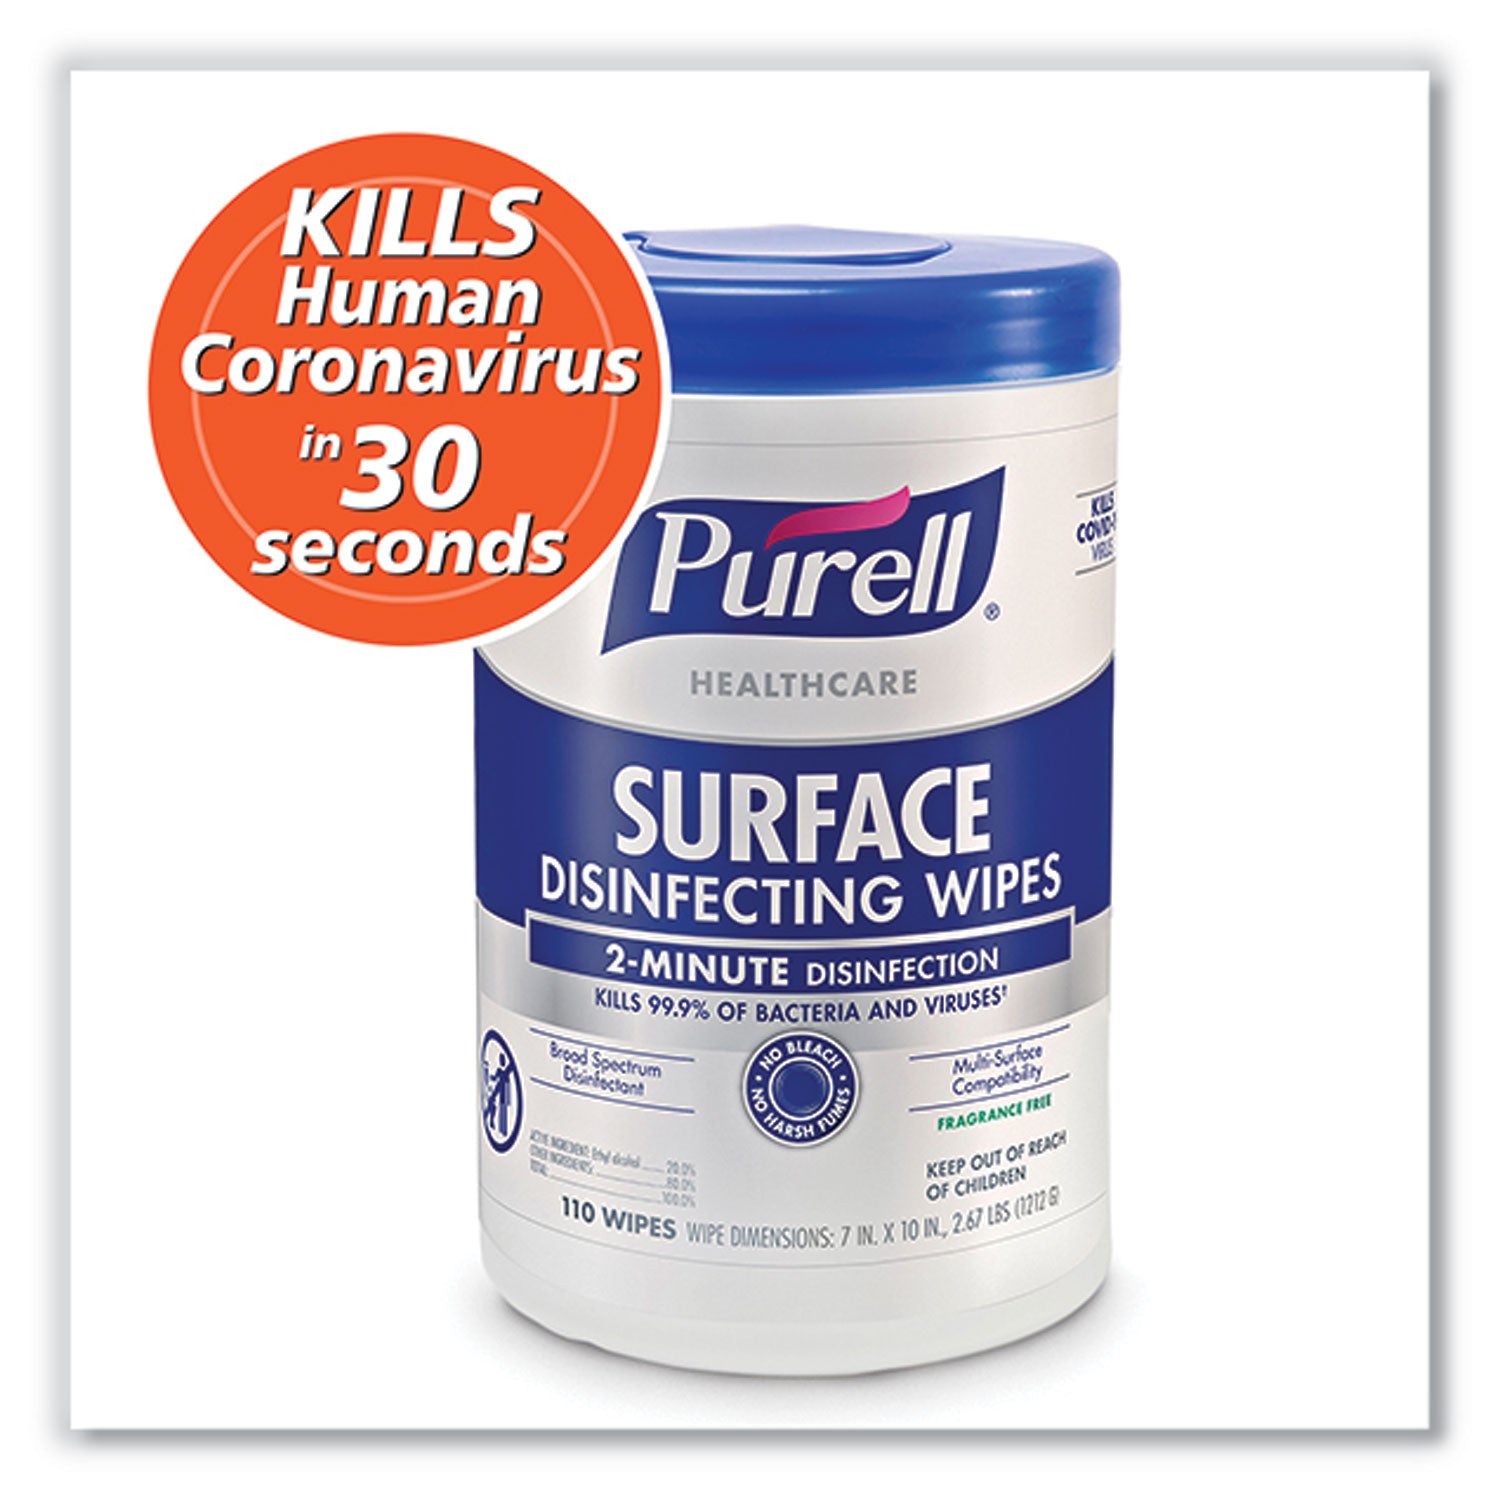 healthcare-surface-disinfecting-wipes-1-ply-7-x-10-unscented-white-110-wipes-canister-6-canisters-carton_goj934006 - 4